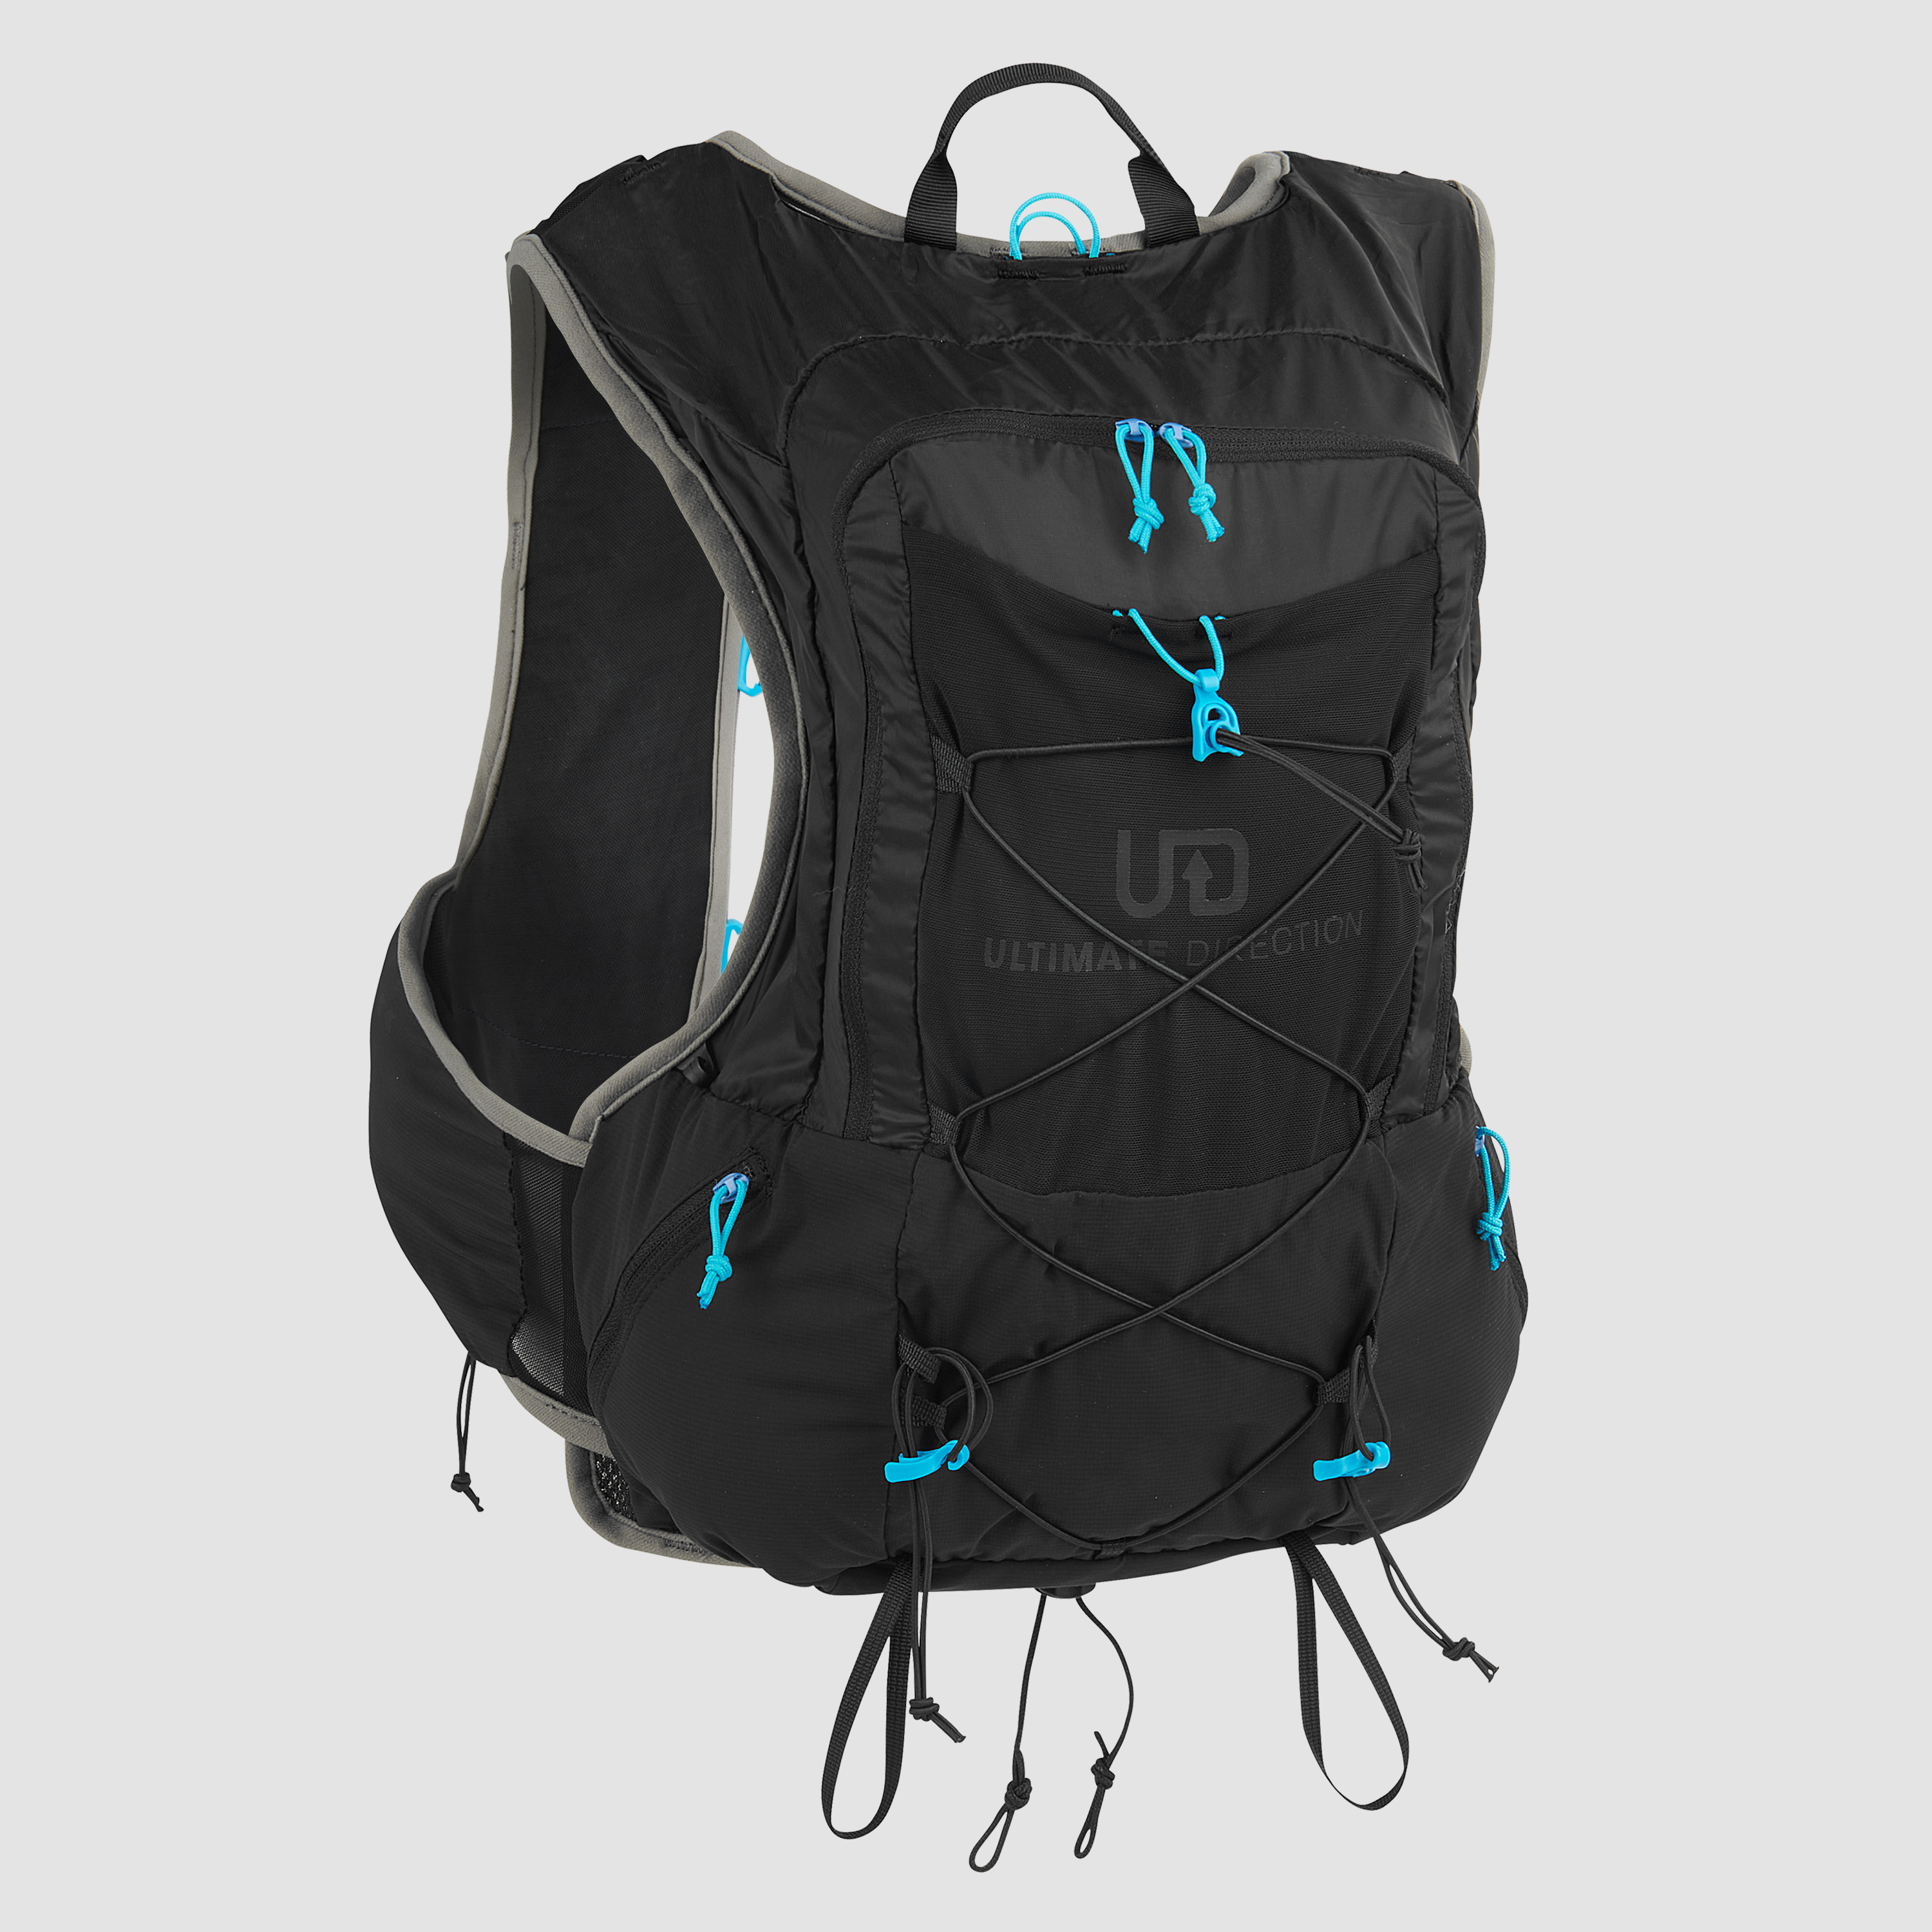 Ultimate Direction Mountain Vest 6.0 in Onyx Size Large